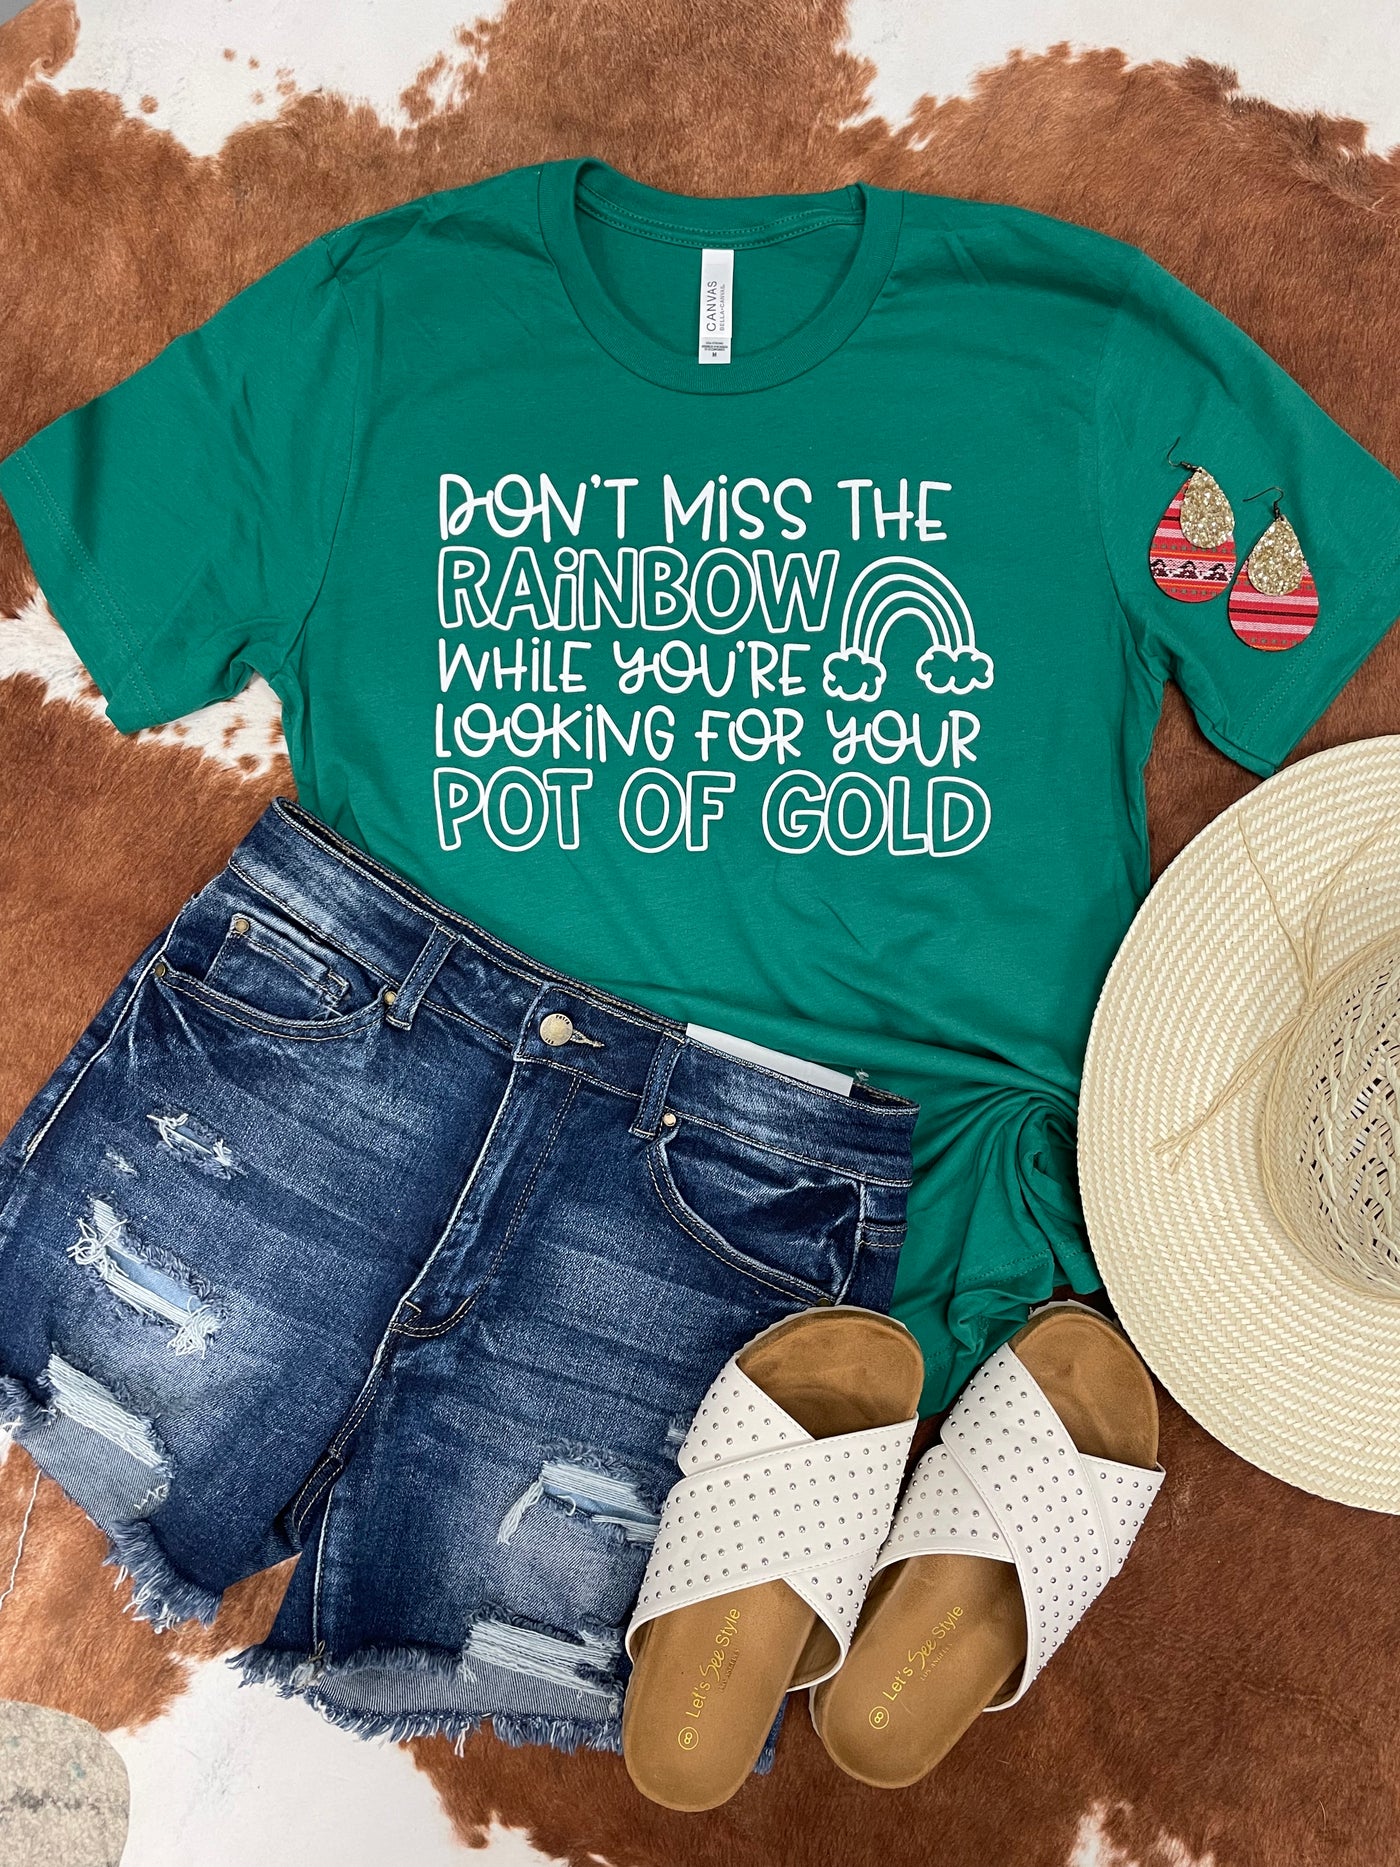 "Don't Miss the Rainbow When You're Looking for the Pot of Gold" T-shirt